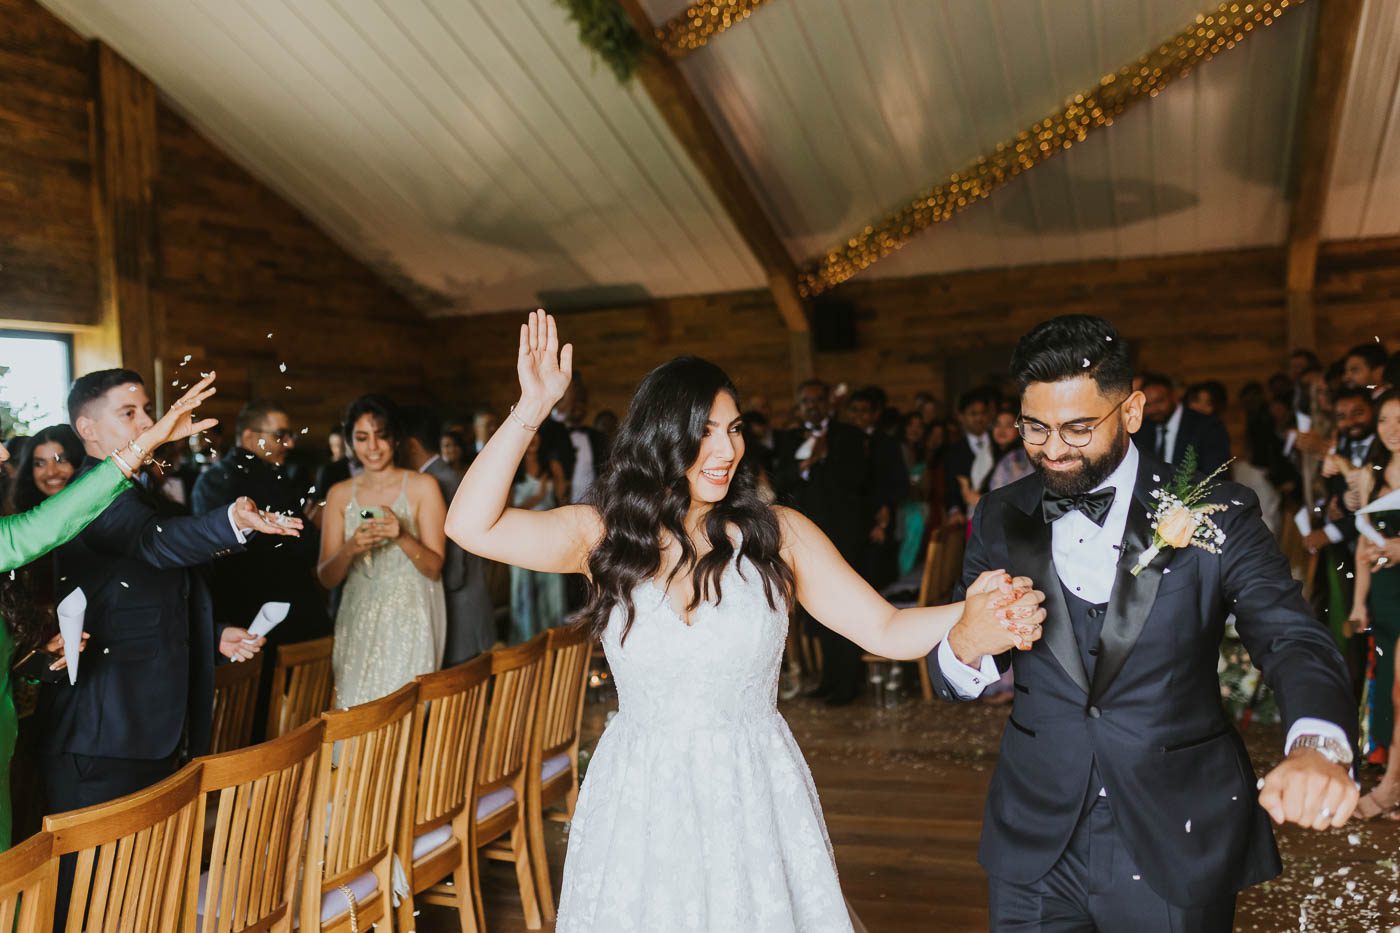 woodstock wedding and events photography | bride and groom dance up the aisle after their wedding ceremony